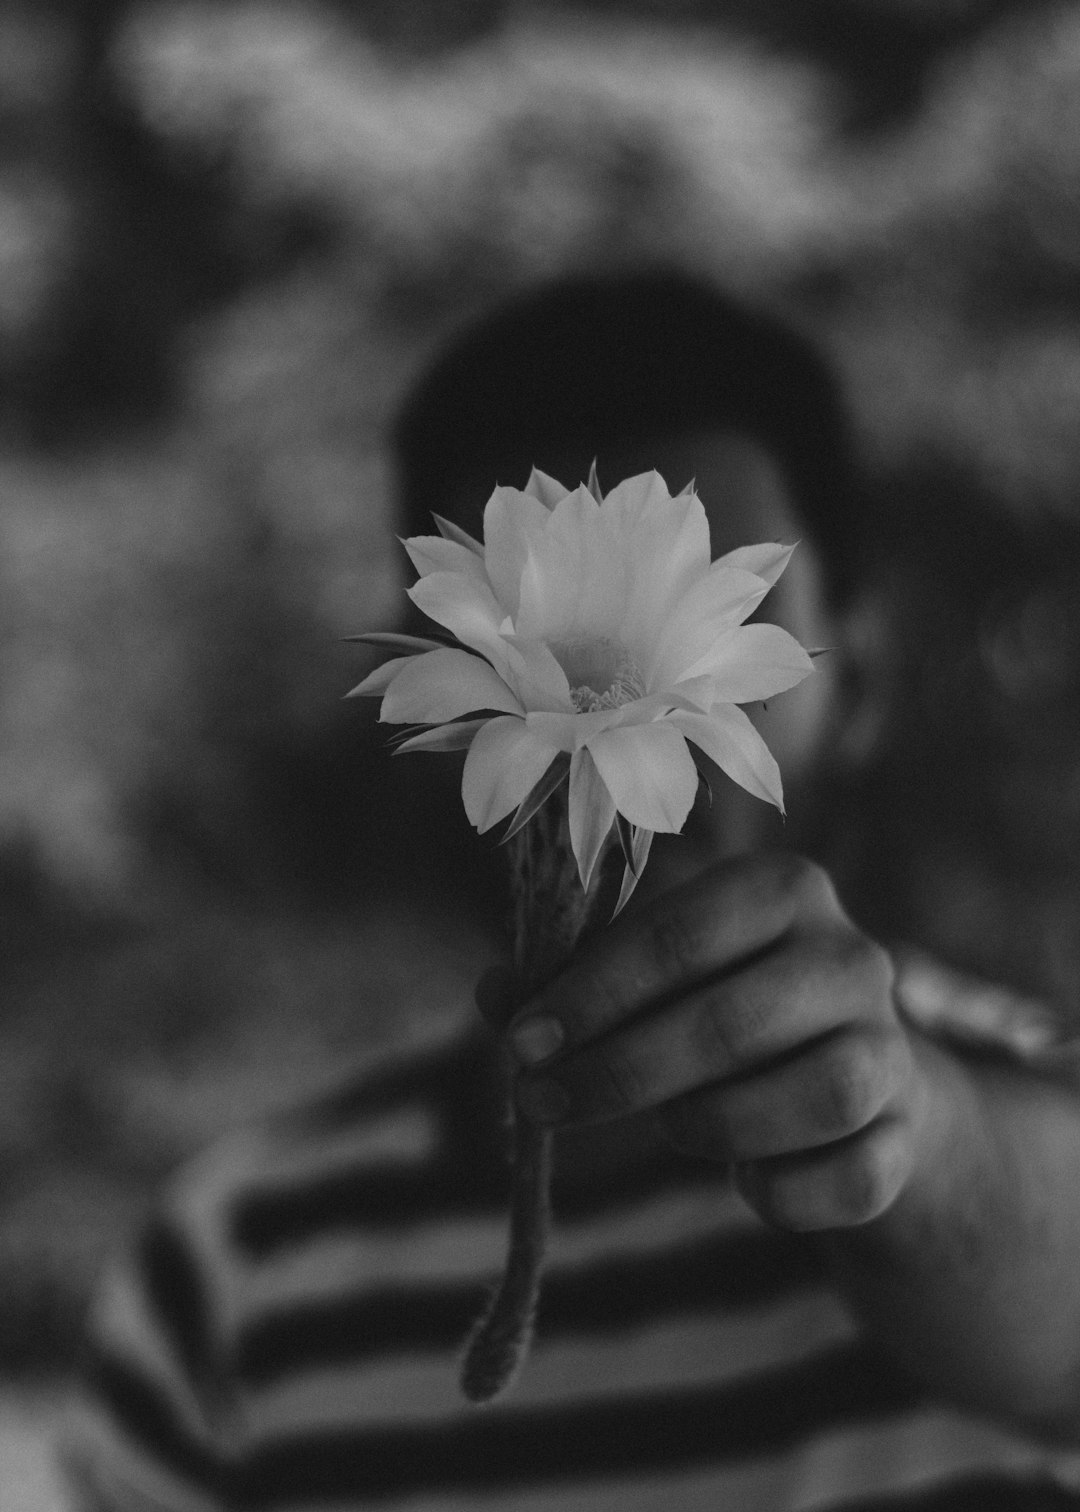 selective focus grayscale photography of person holding petaled flower